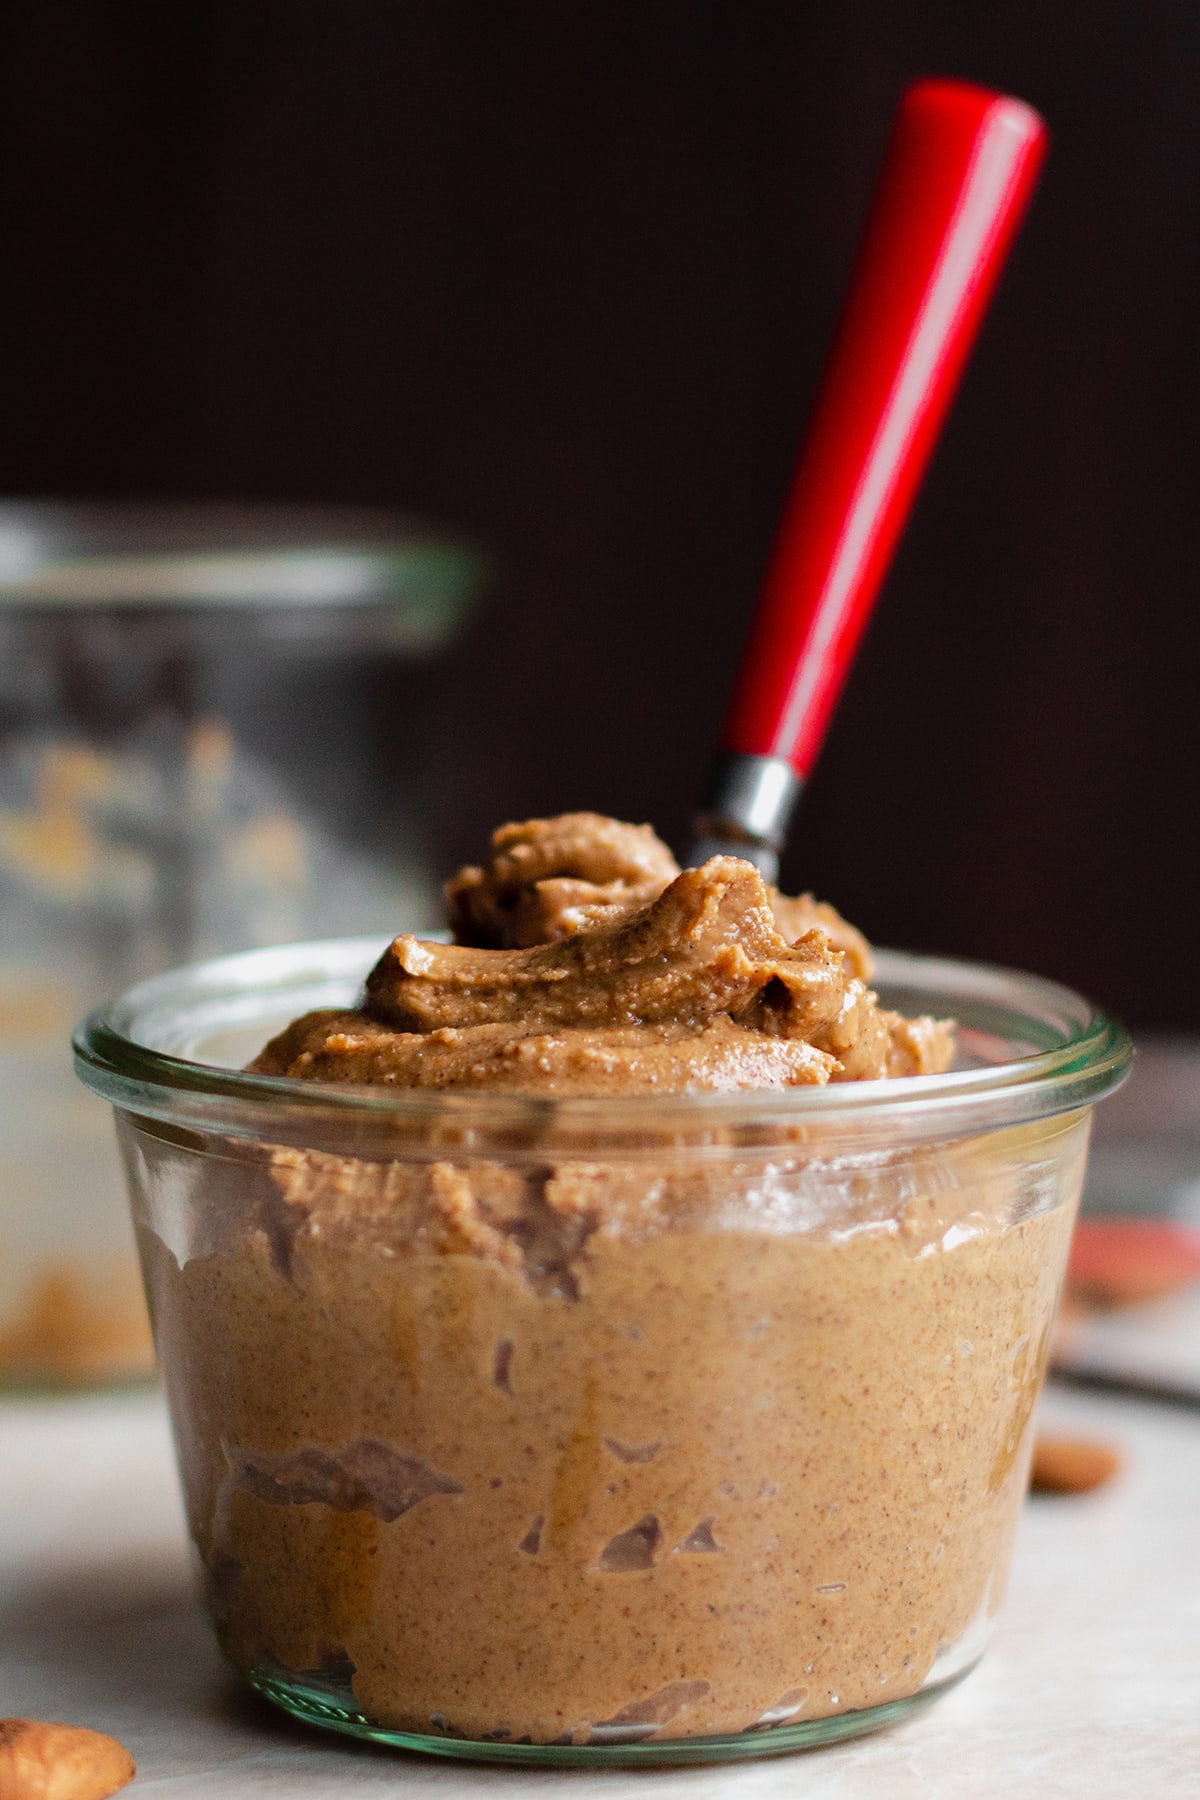 Salted Caramel Nut Butter in a glass jar with a red spoon.